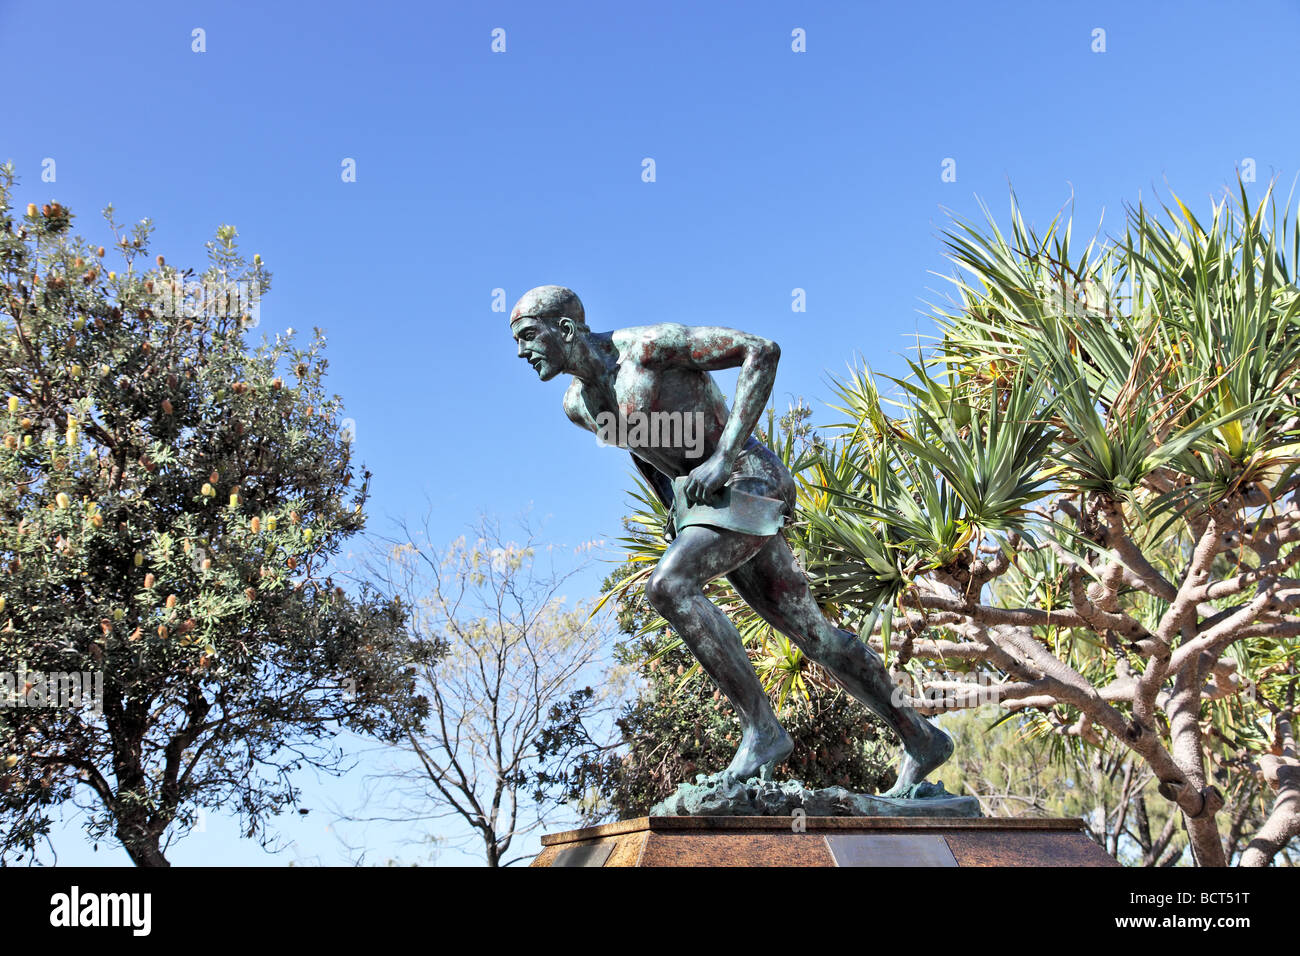 Bronze statue of an Australain lifesaver near a beach with belt and rope Stock Photo